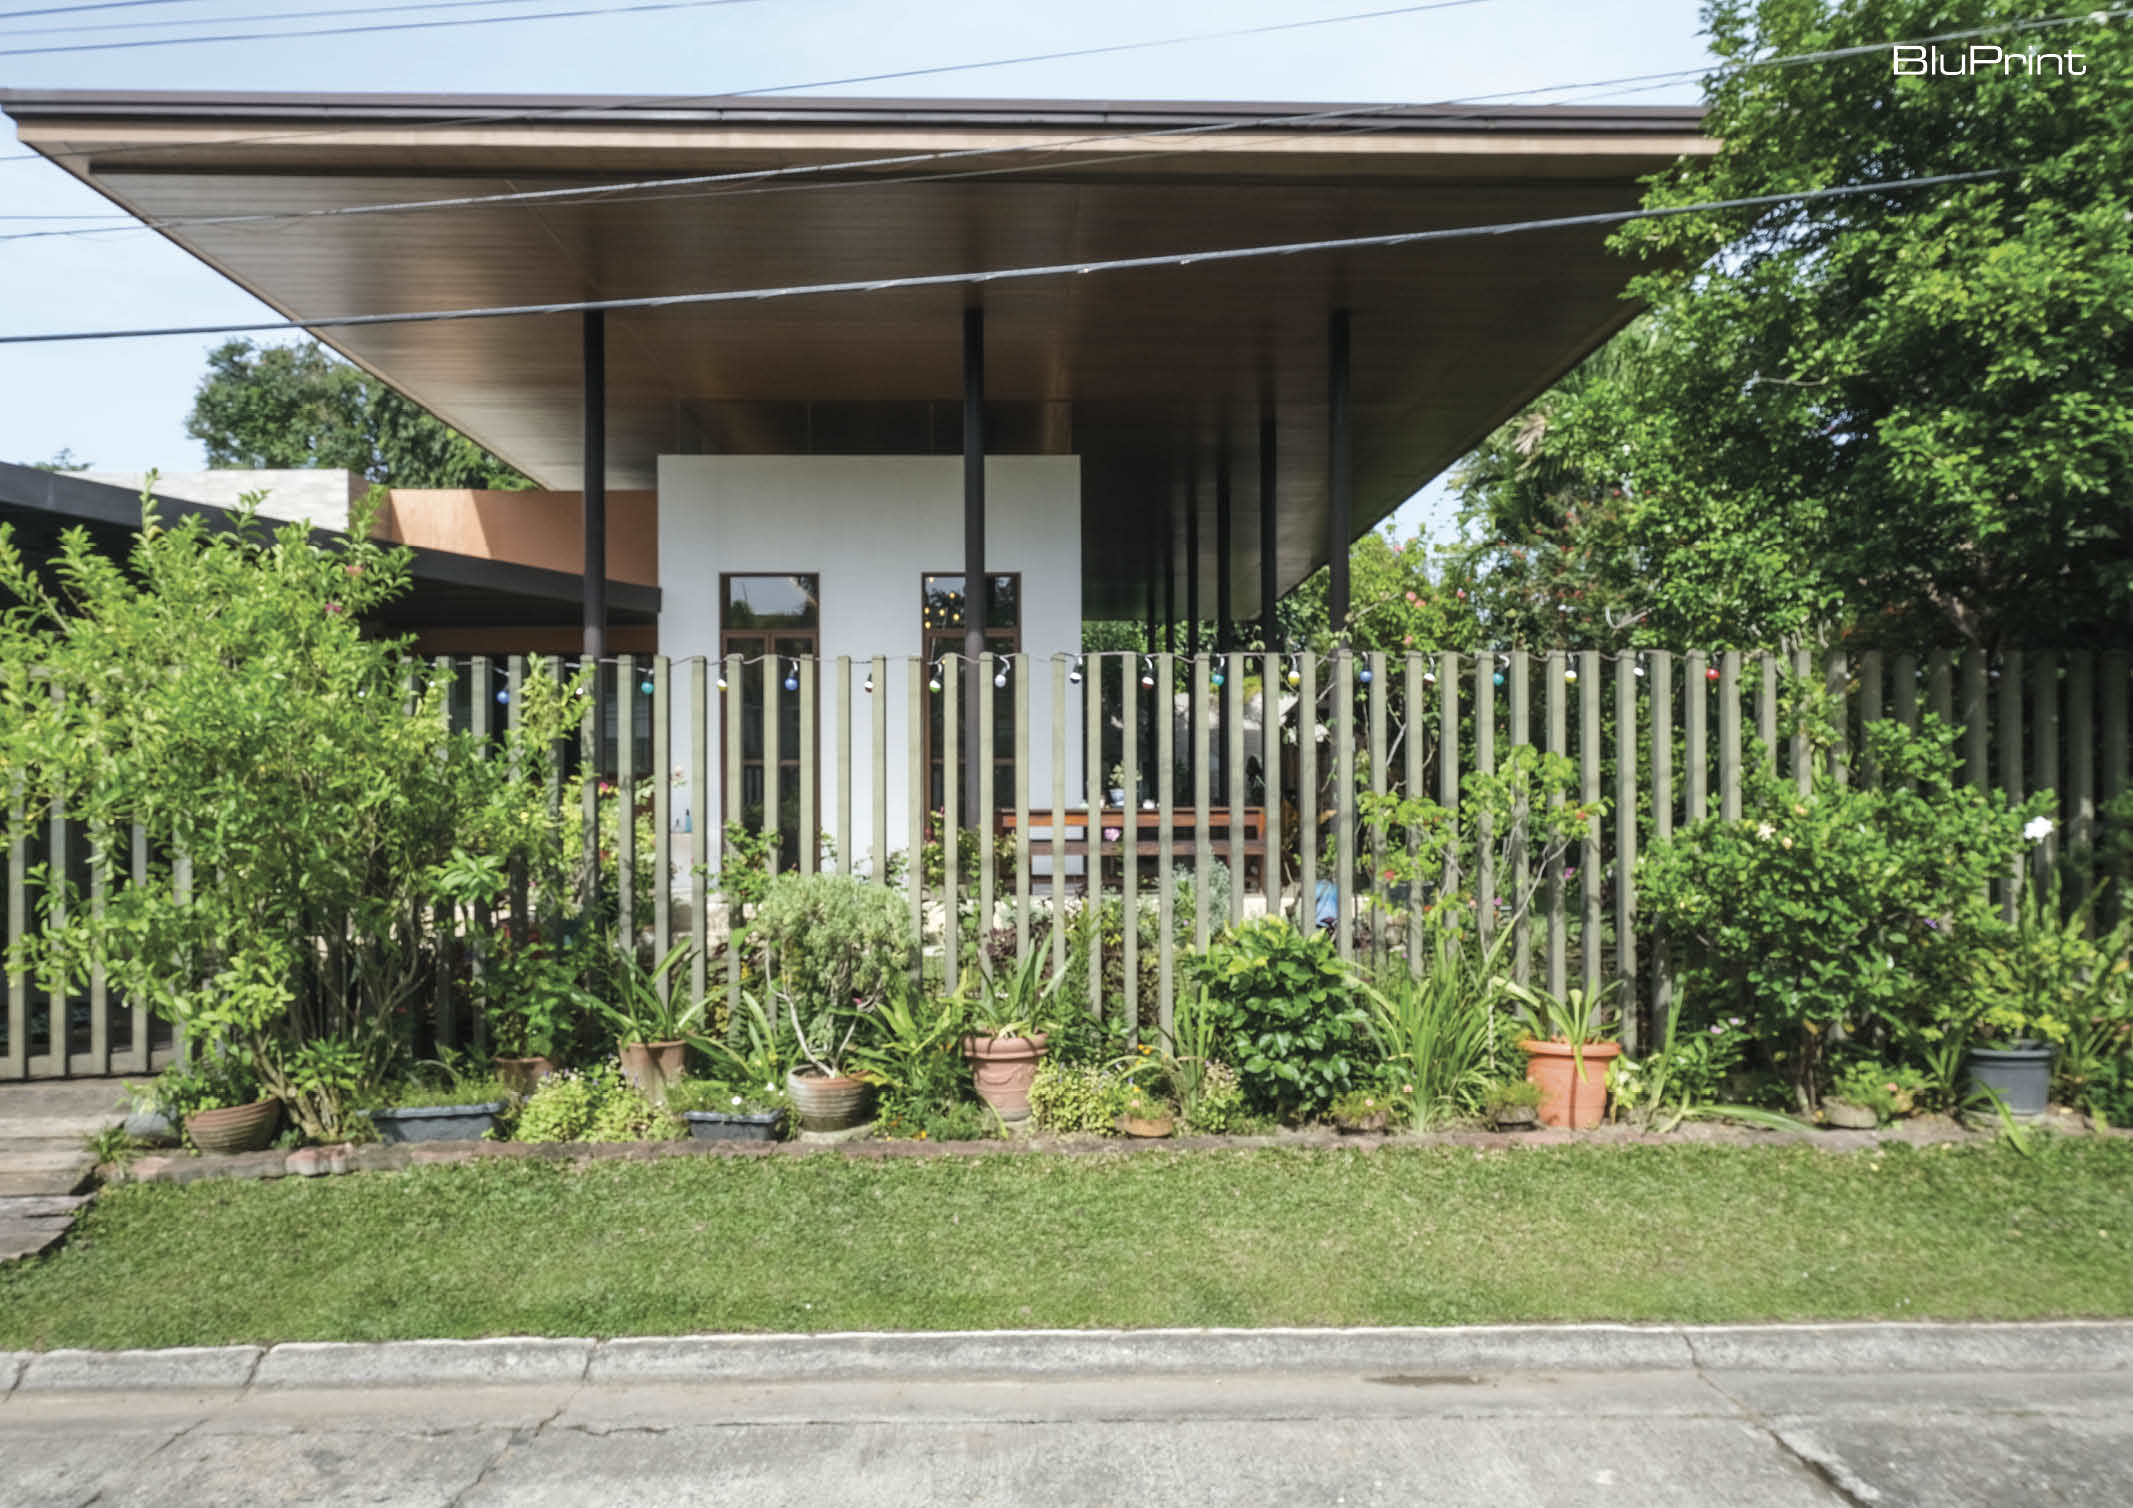 Front view of modern home's front yard and metal fencing